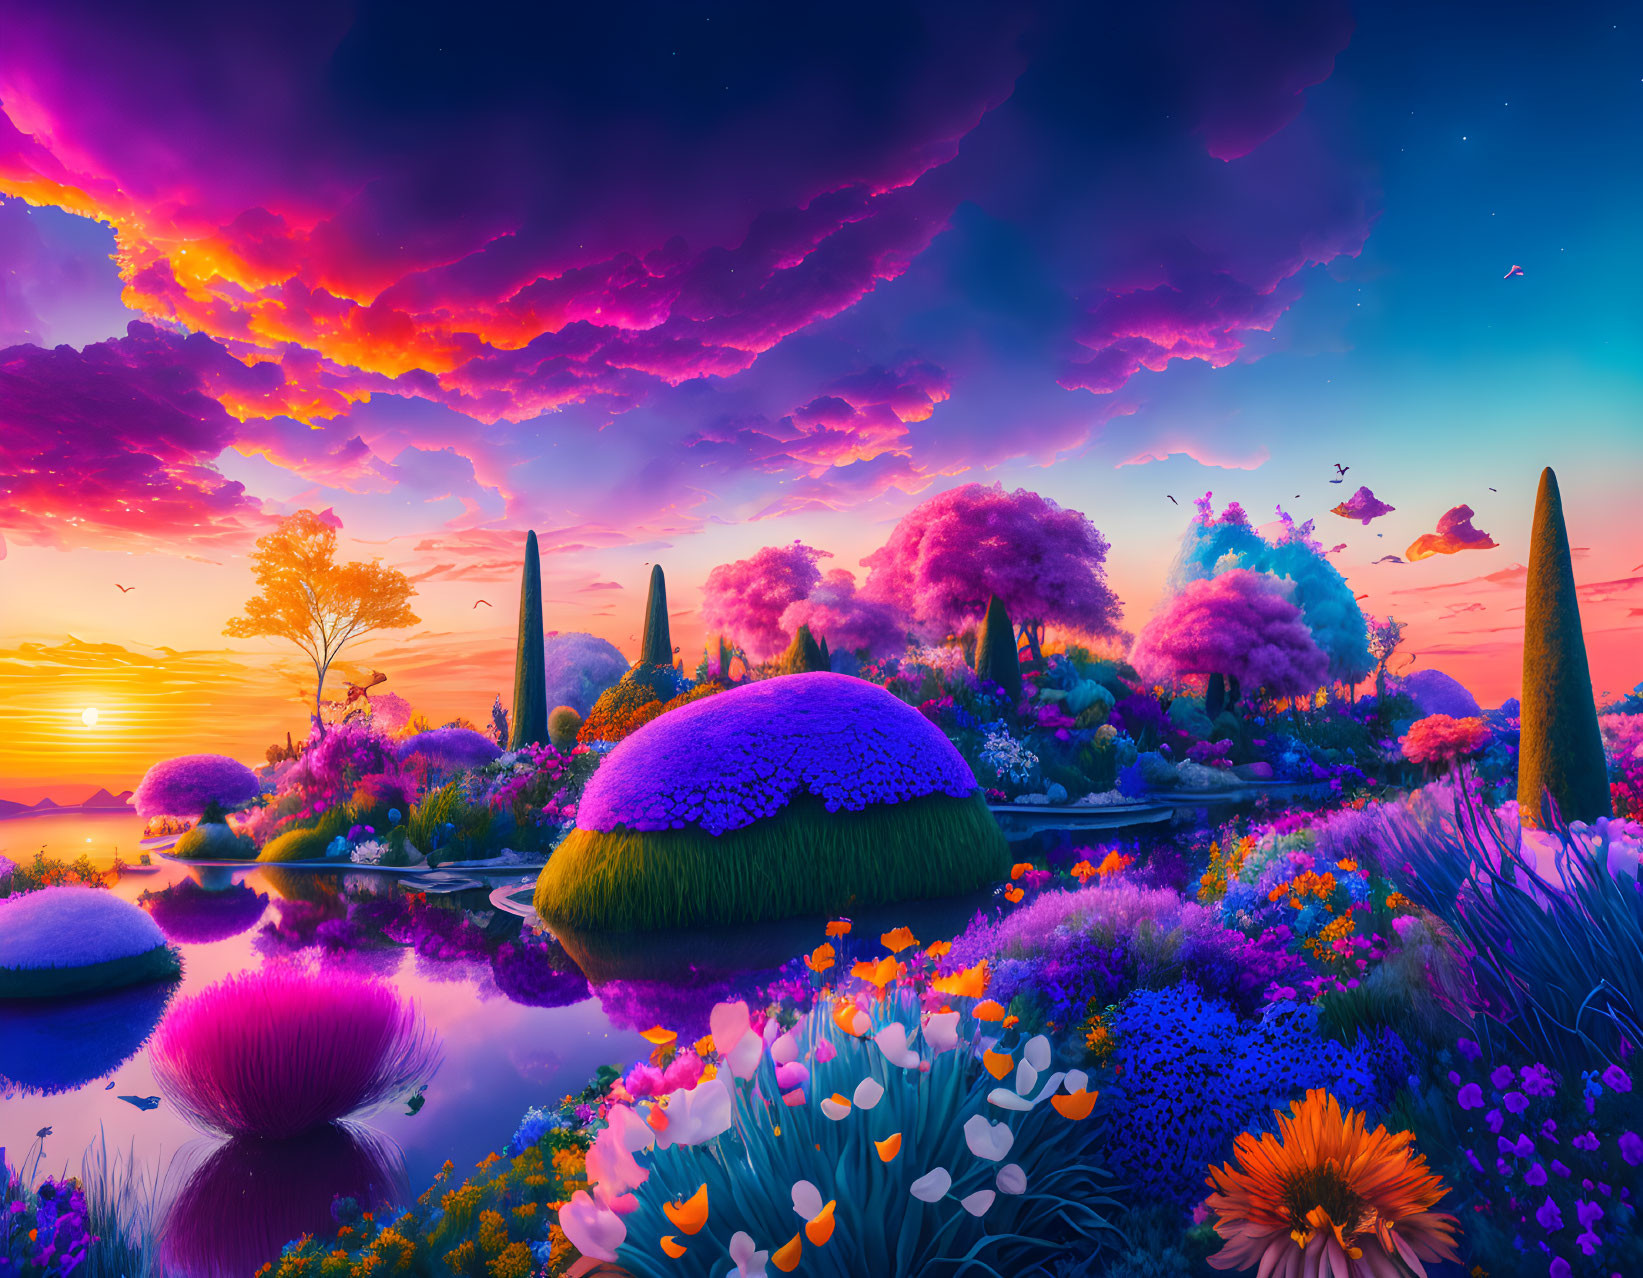 Colorful Fantasy Landscape: Sunset Gardens & Whimsical Topiary